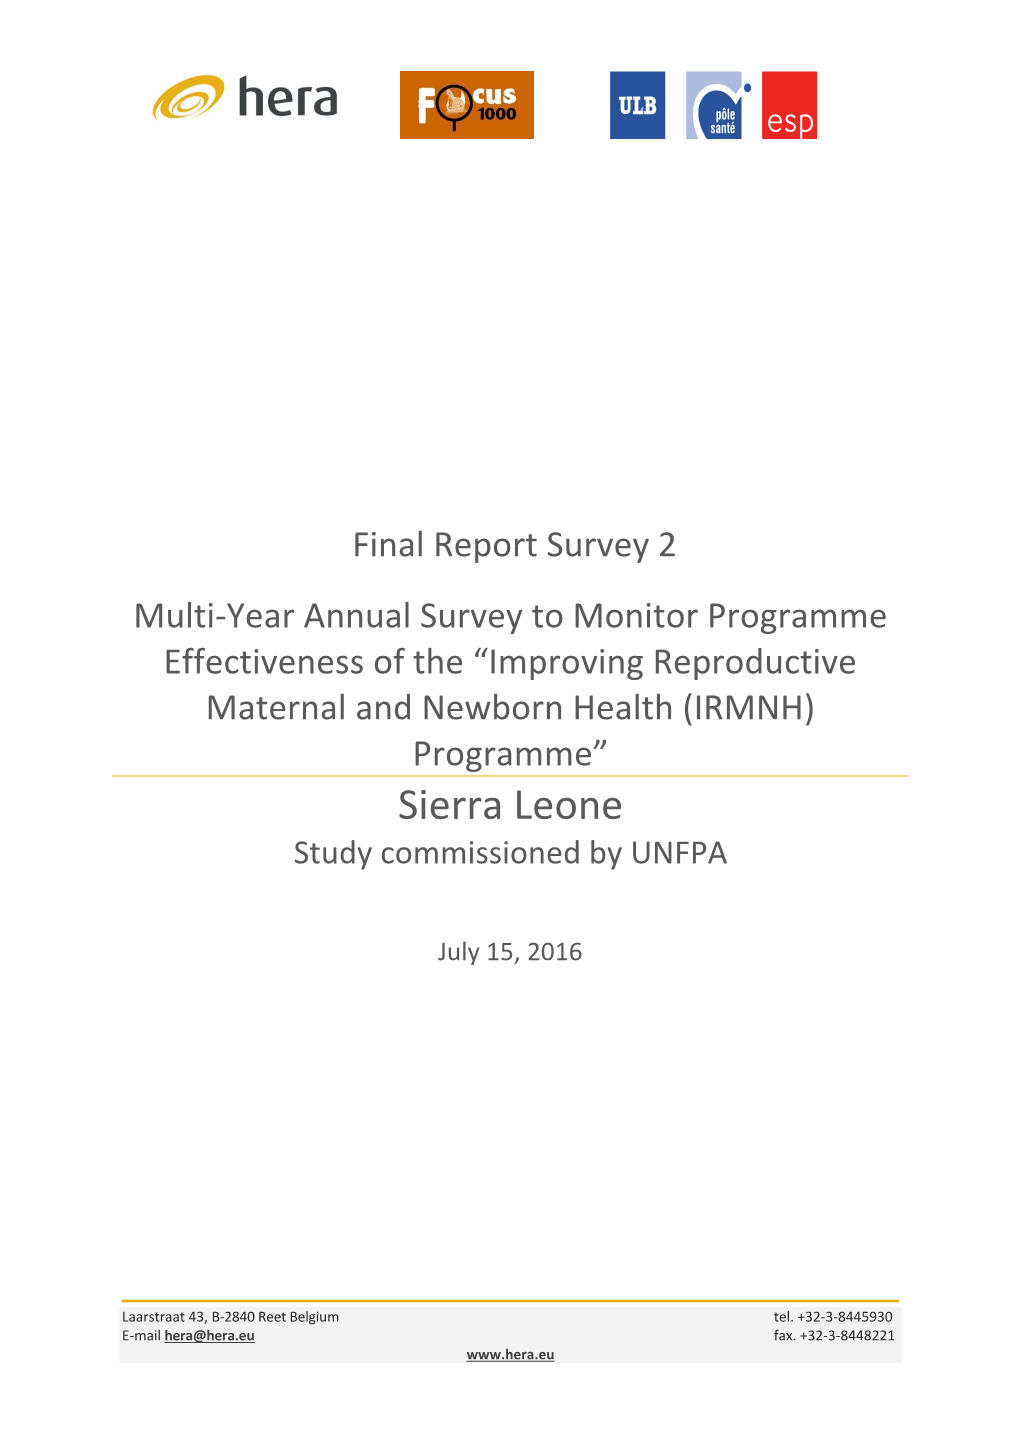 Improving Reproductive Maternal and Newborn Health (IRMNH) Programme” Sierra Leone Study Commissioned by UNFPA